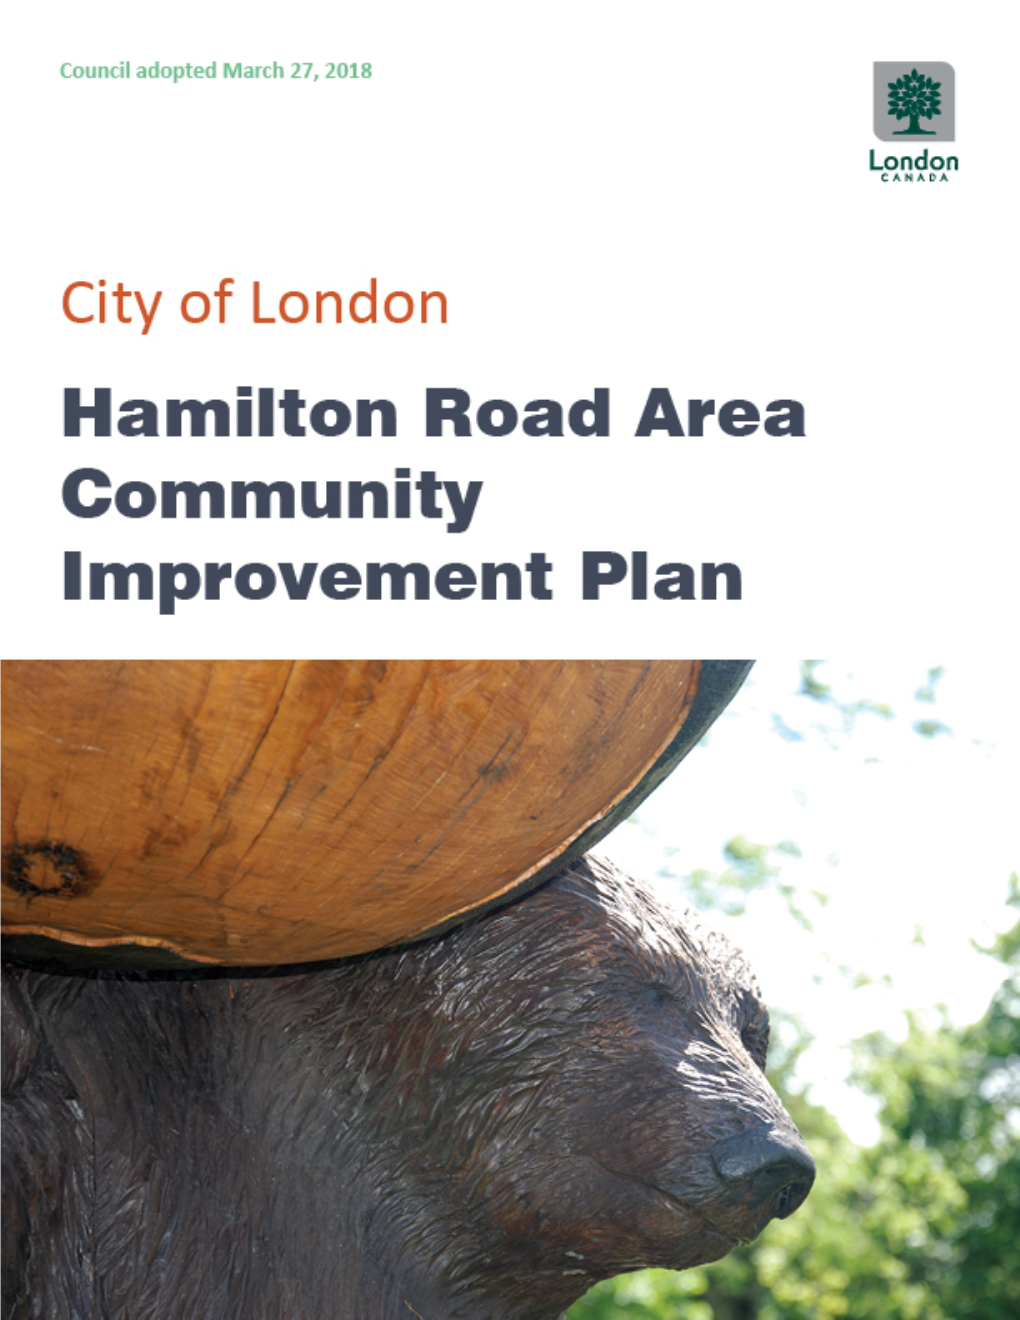 Hamilton Road Area Community Improvement Plan Adopted Pursuant to Section 28 of the Planning Act